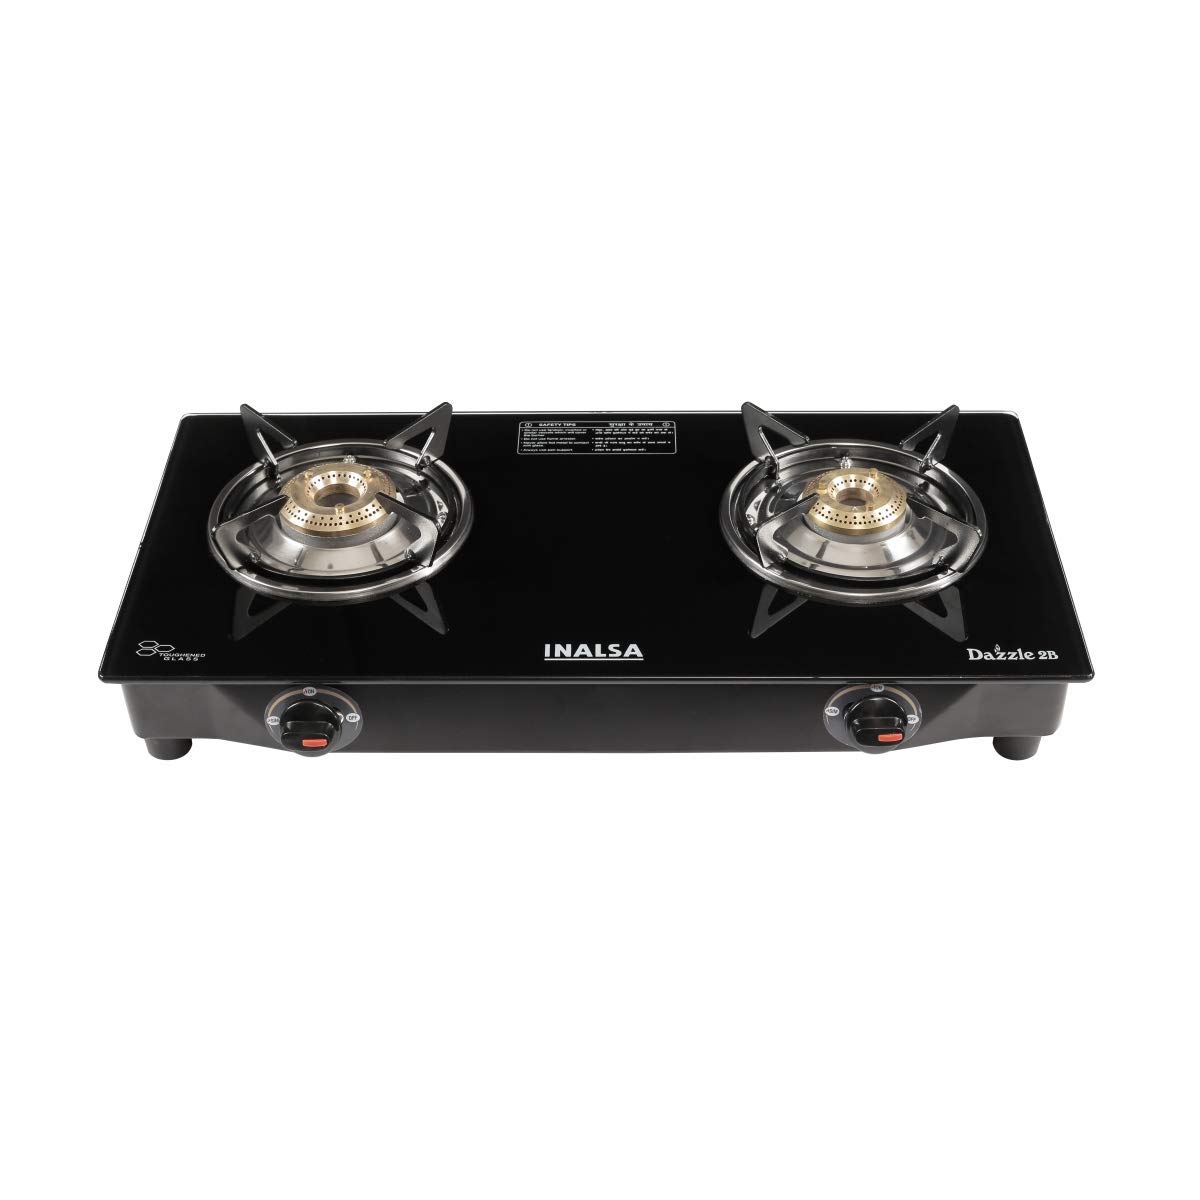 Inalsa Dazzle 2B-Glass Top |2 Burner Gas Stove with Rust Proof Powder Coated Body,(Black)